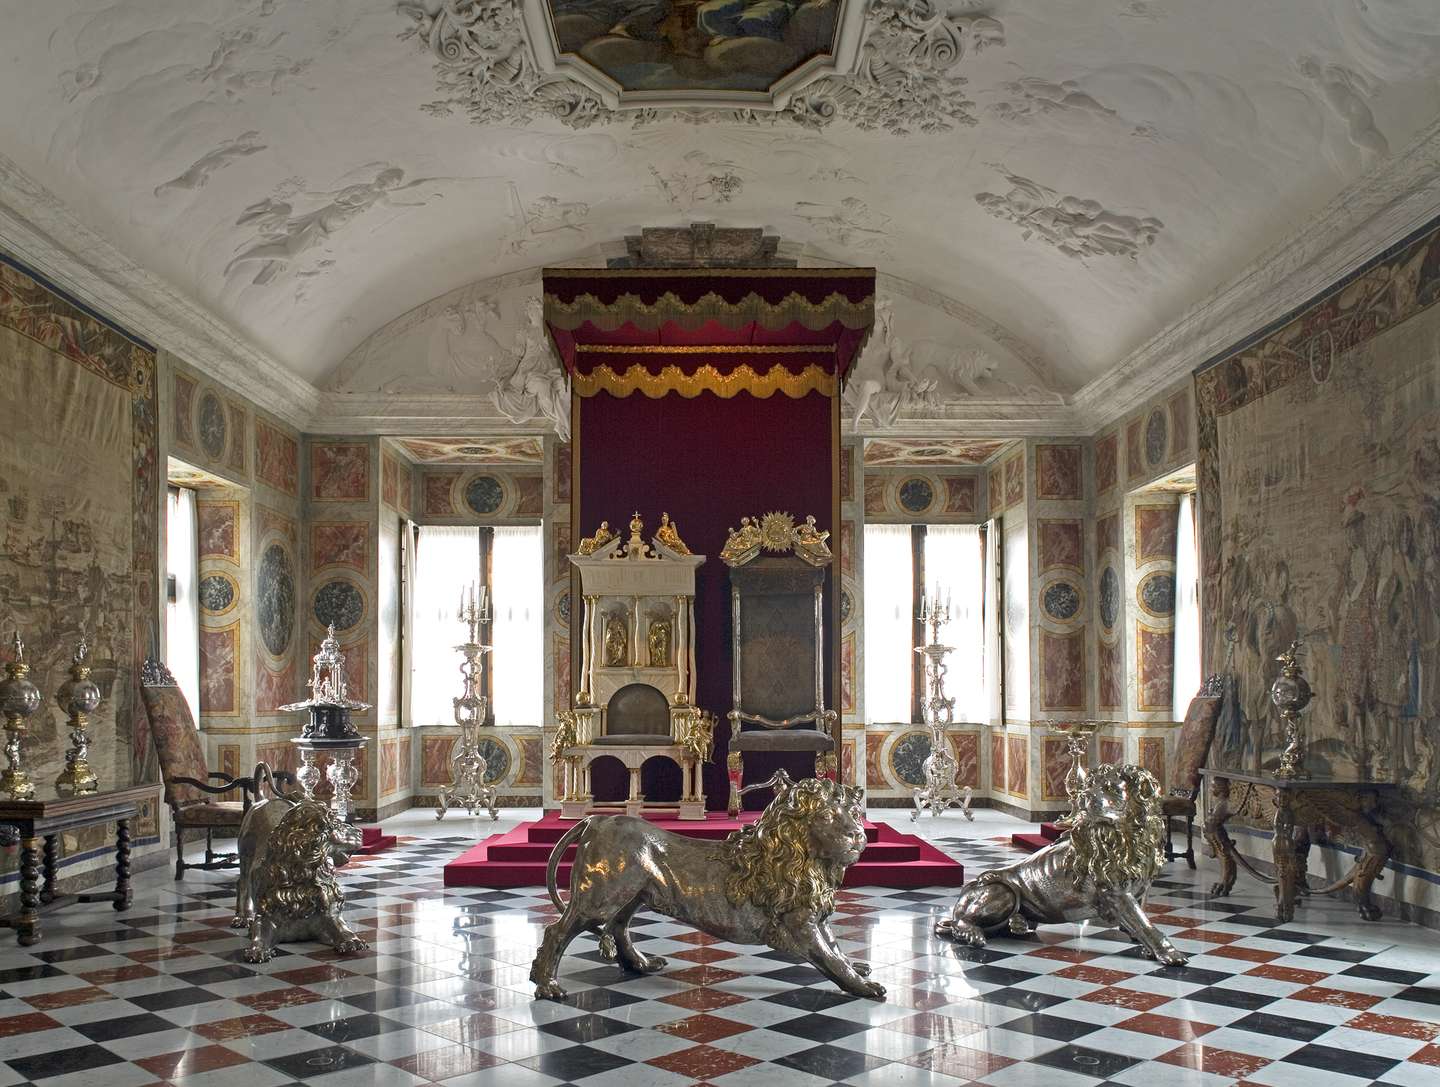 The Long Hall with the thrones and silver lions